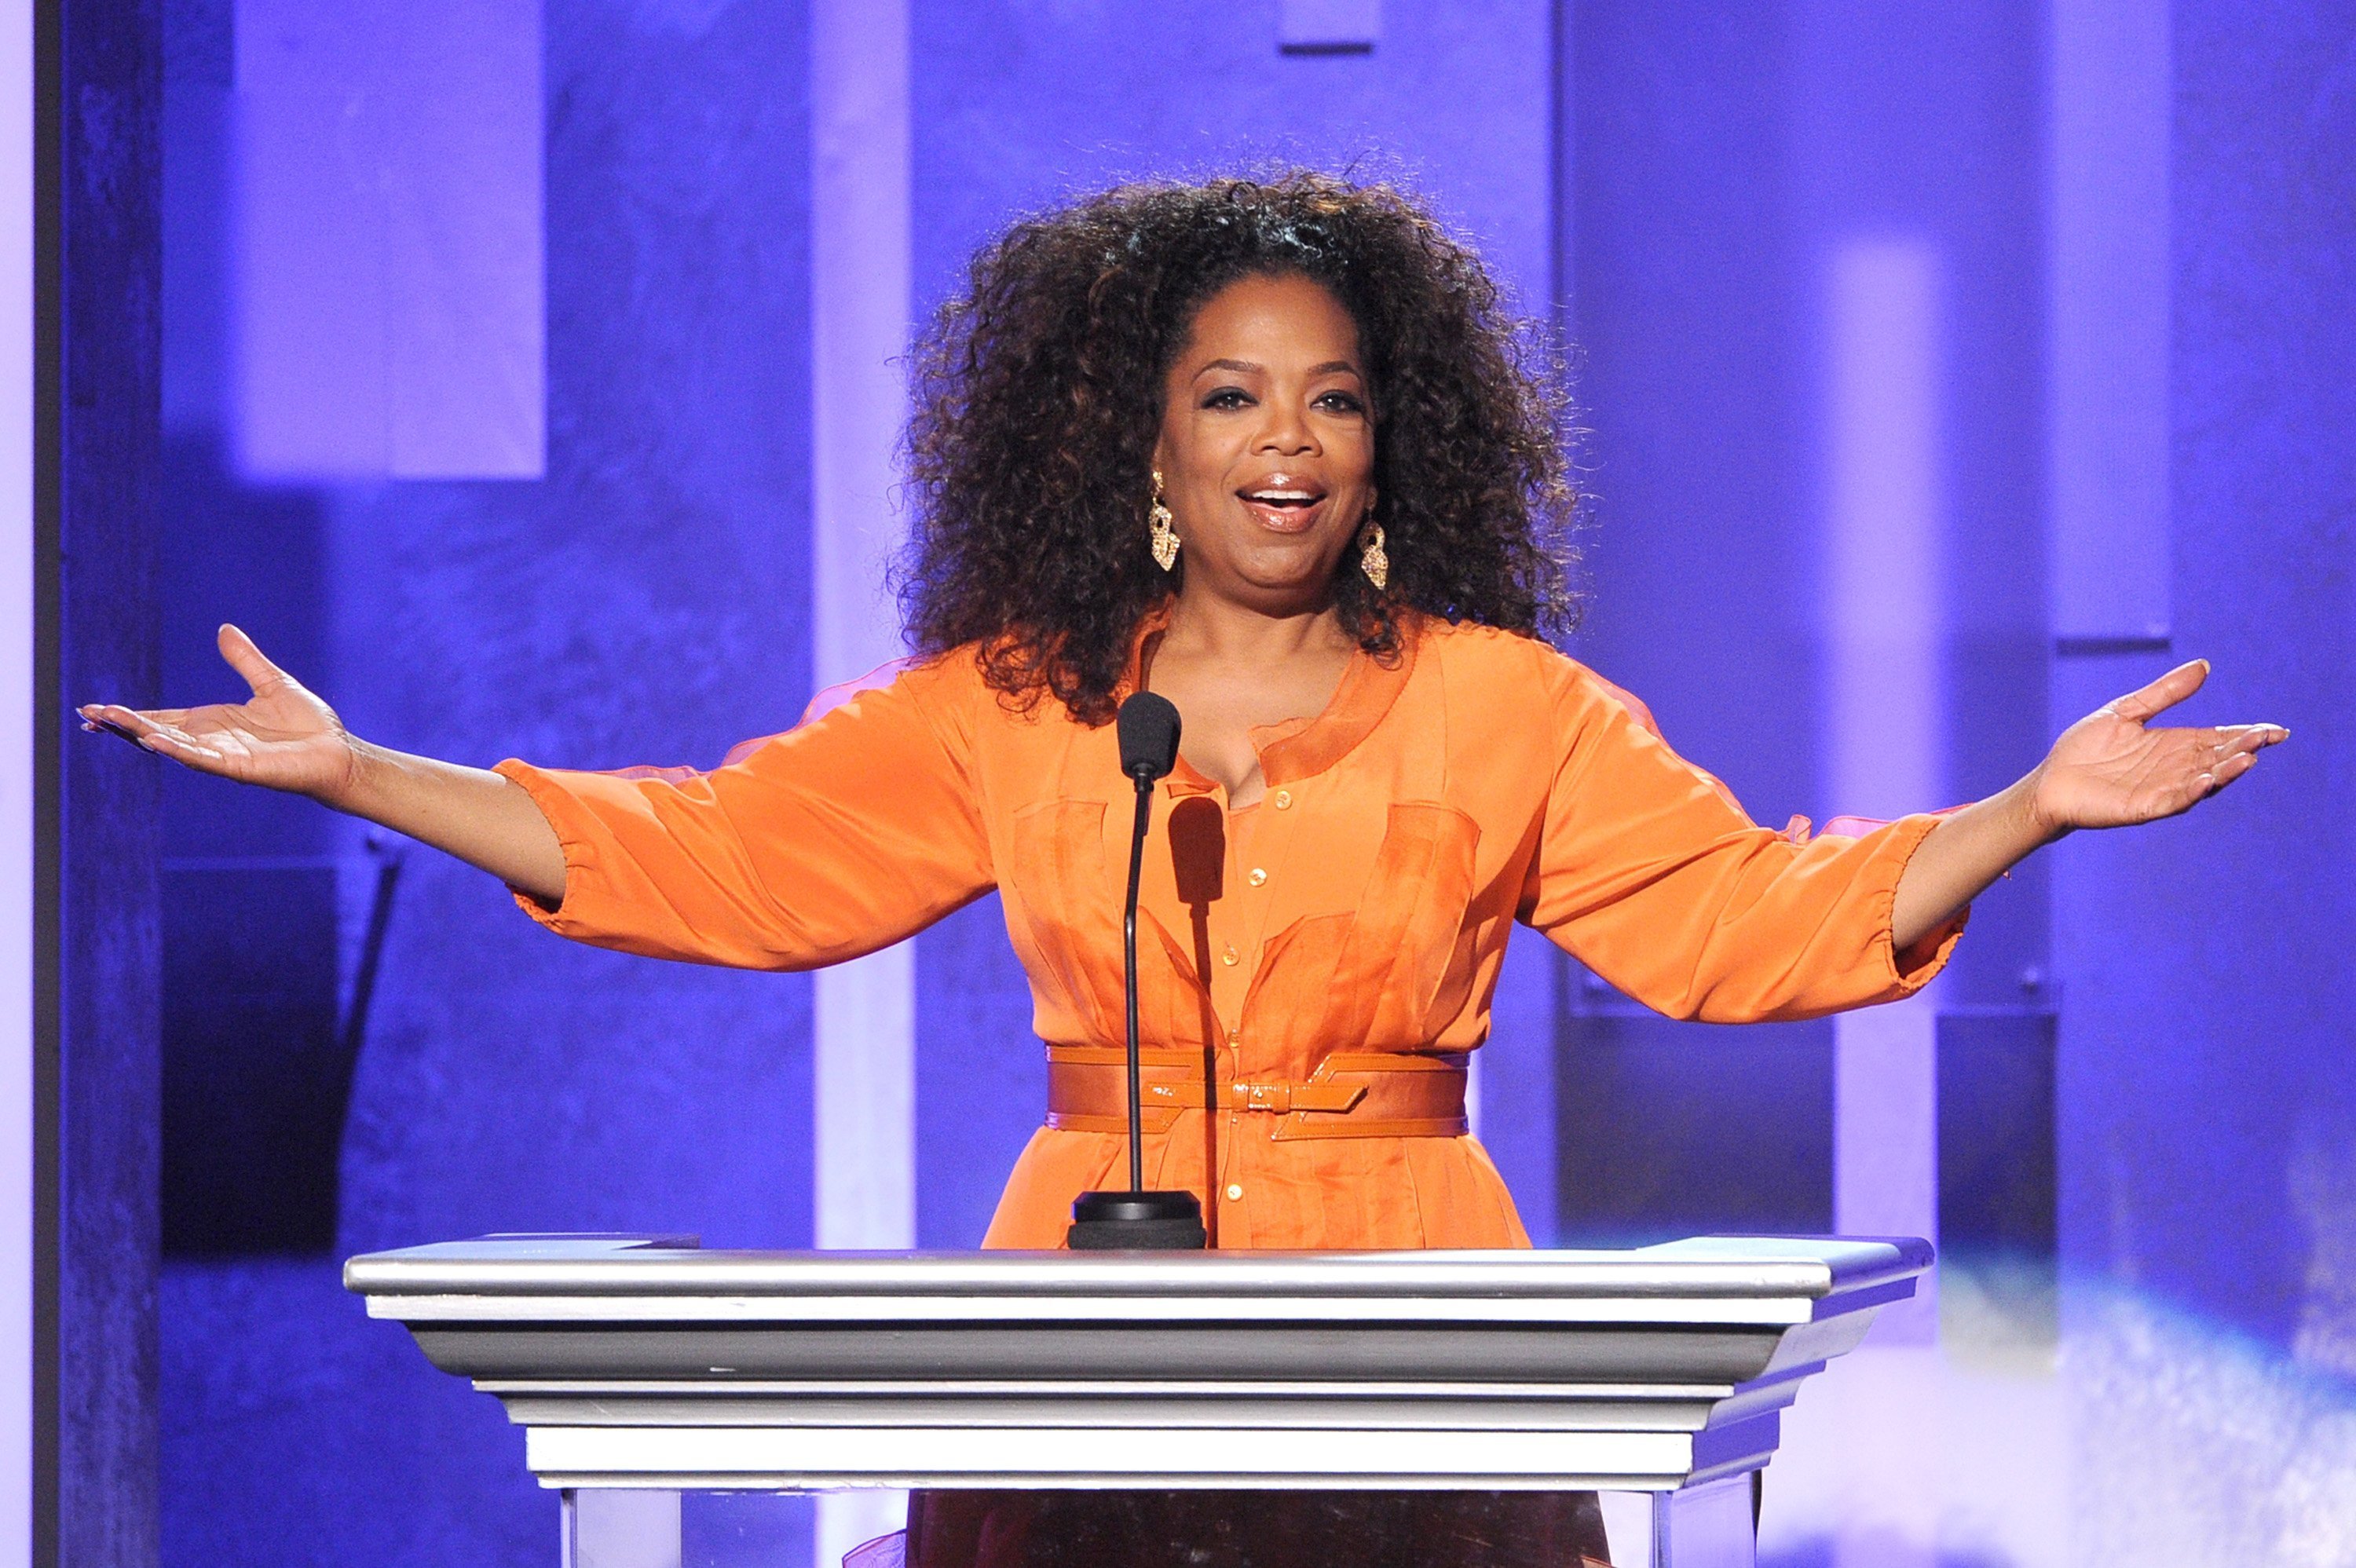  Oprah Winfrey speaks onstage during the 45th NAACP Image Awards presented by TV One at Pasadena Civic Auditorium on February 22, 2014|Photo: Getty Images